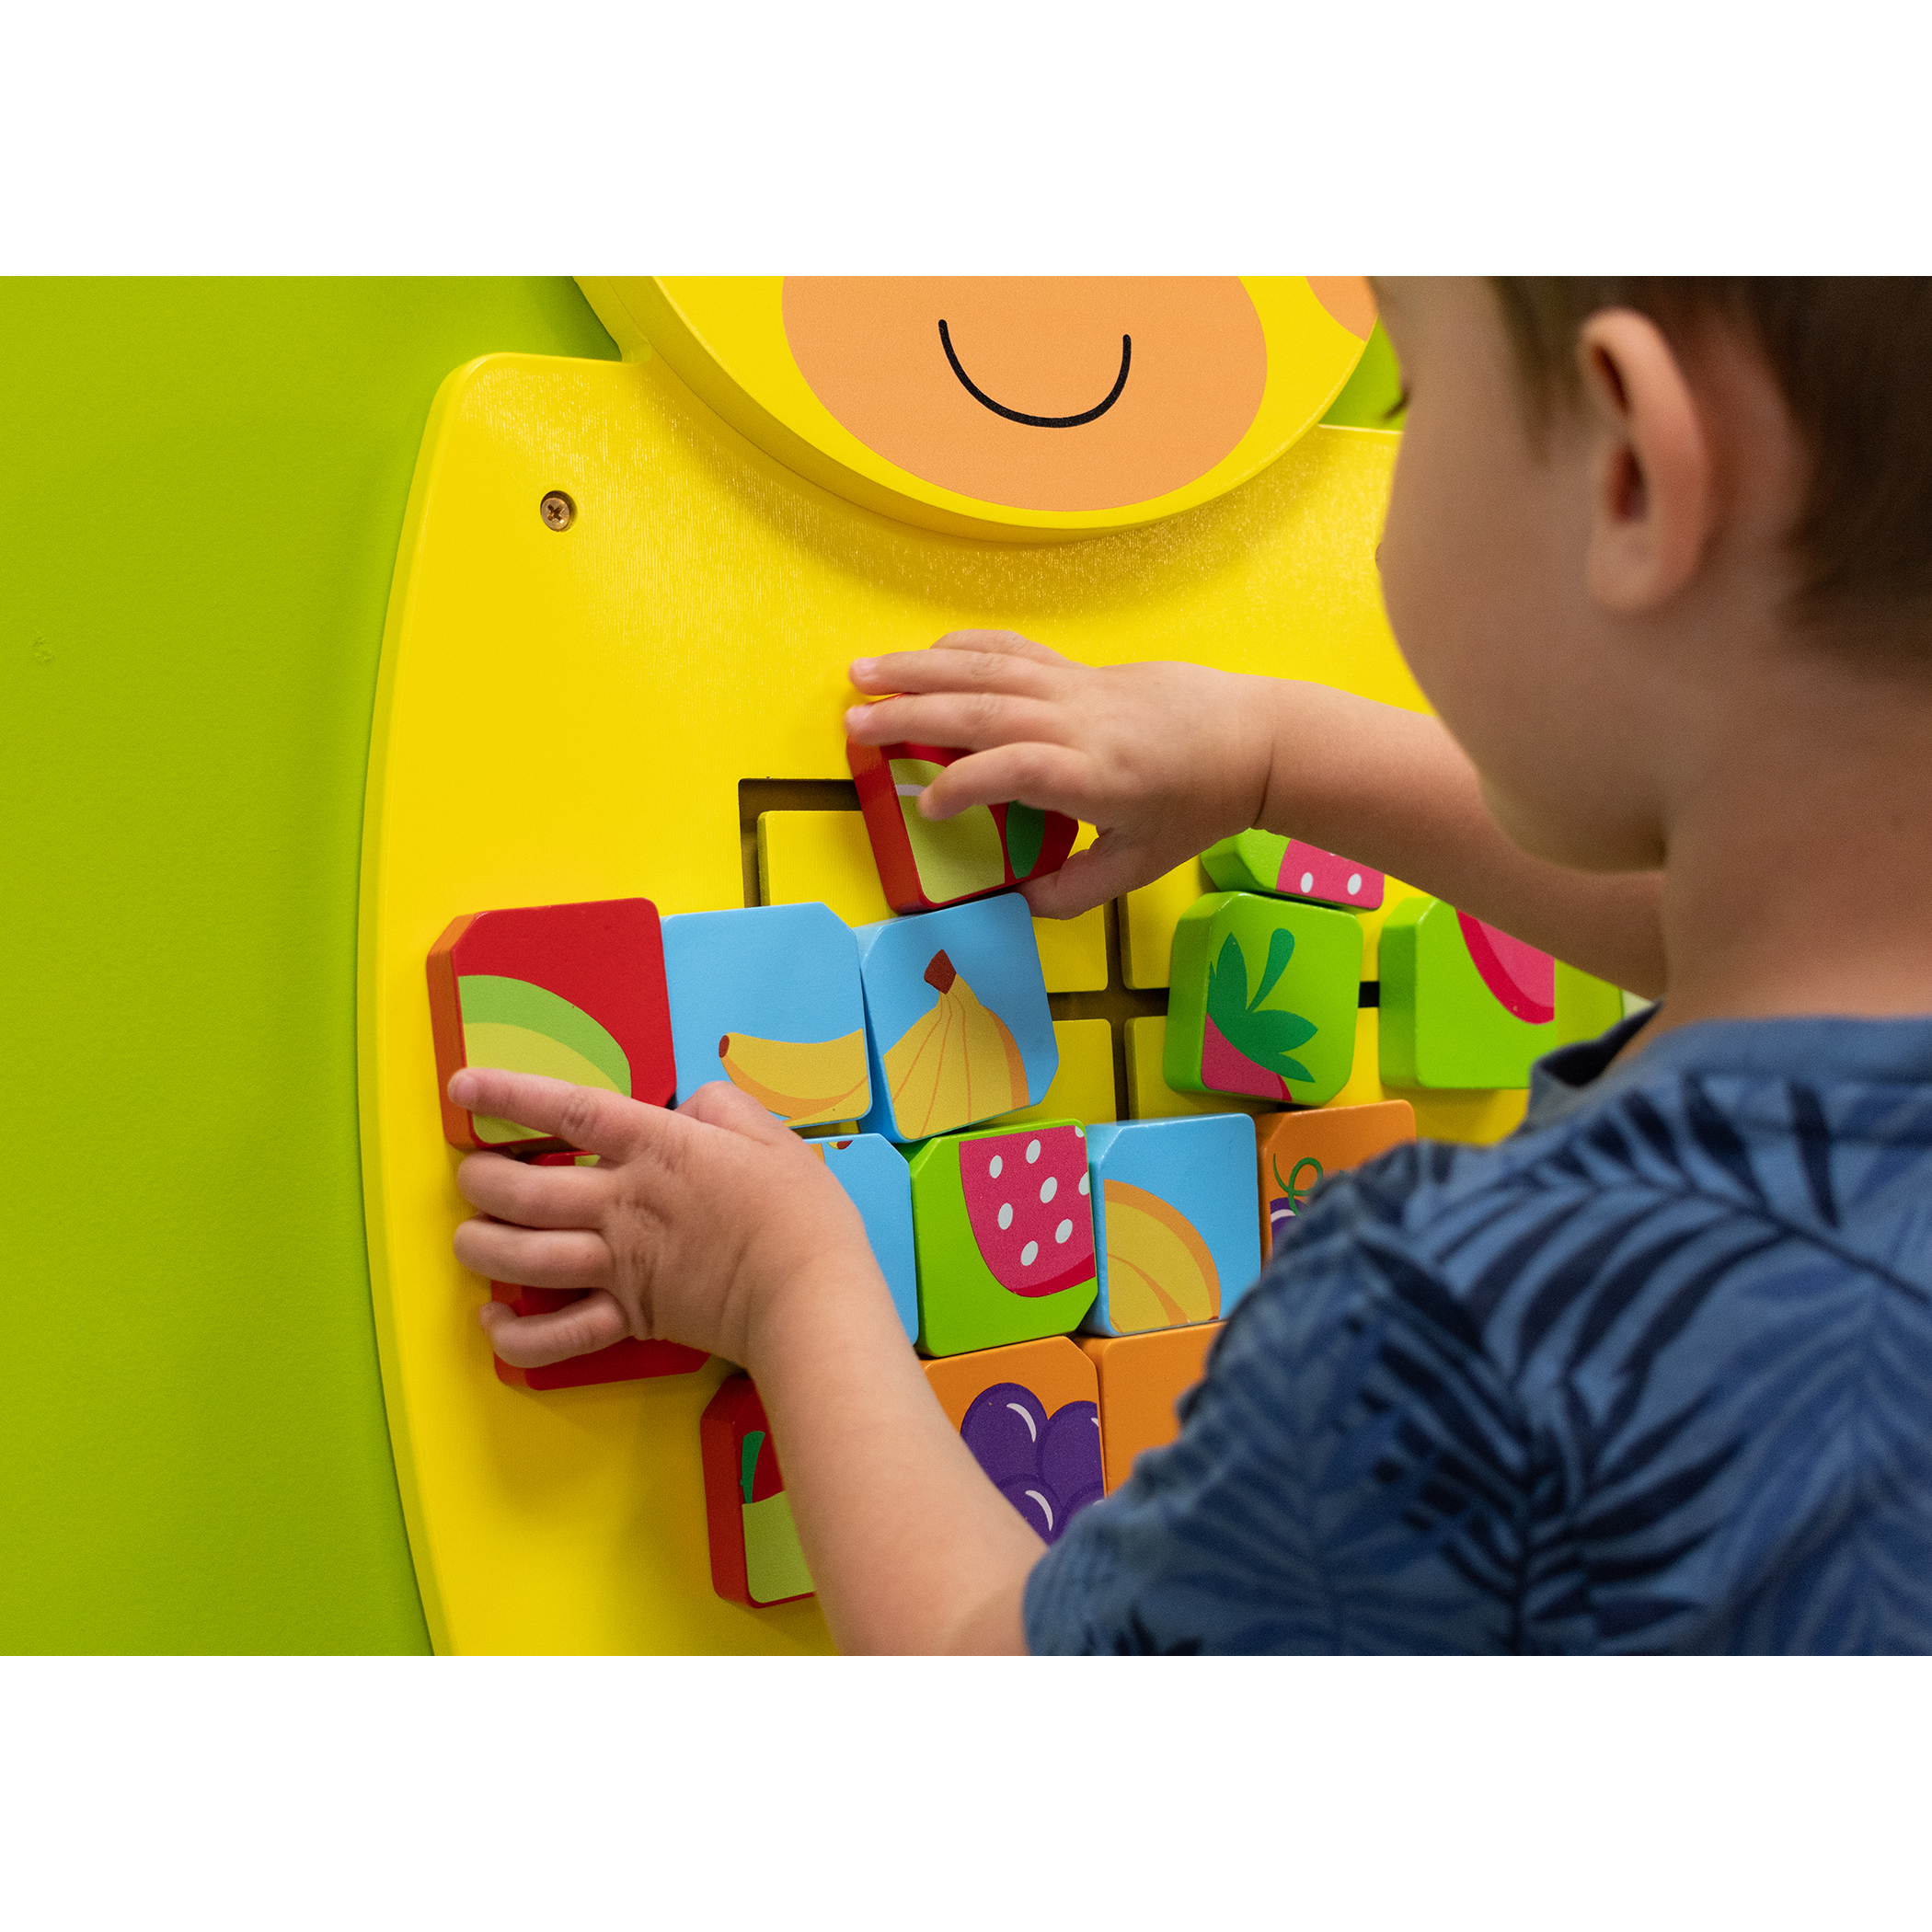 Learning Advantage Giraffe Activity Wall Panel - 18m+ - Toddler Activity Center image number null